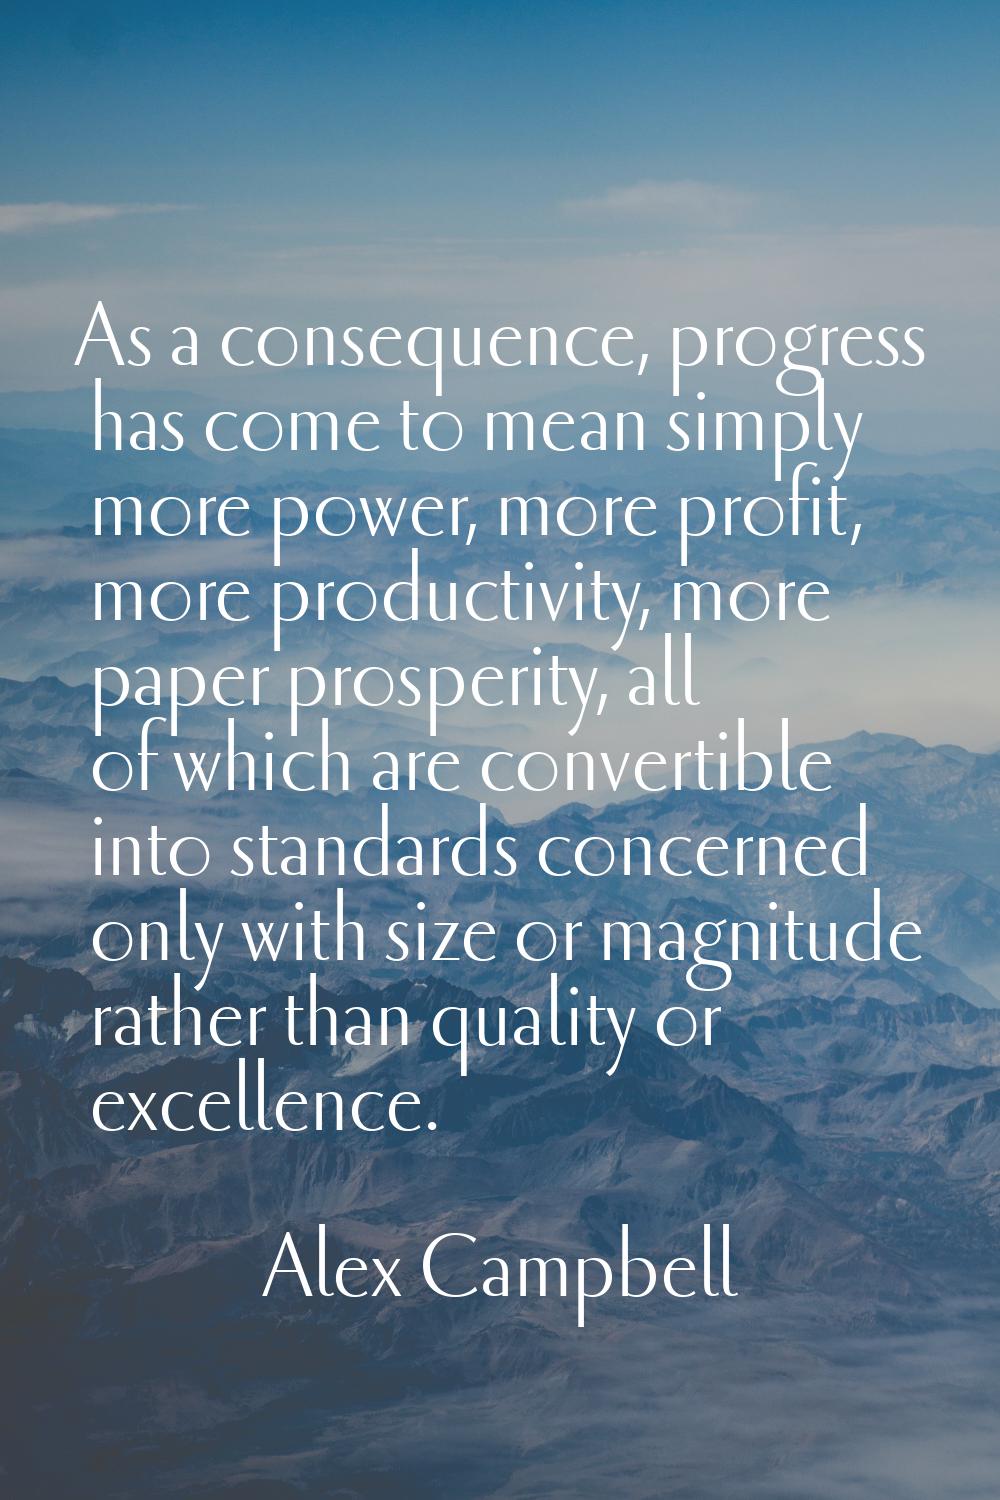 As a consequence, progress has come to mean simply more power, more profit, more productivity, more